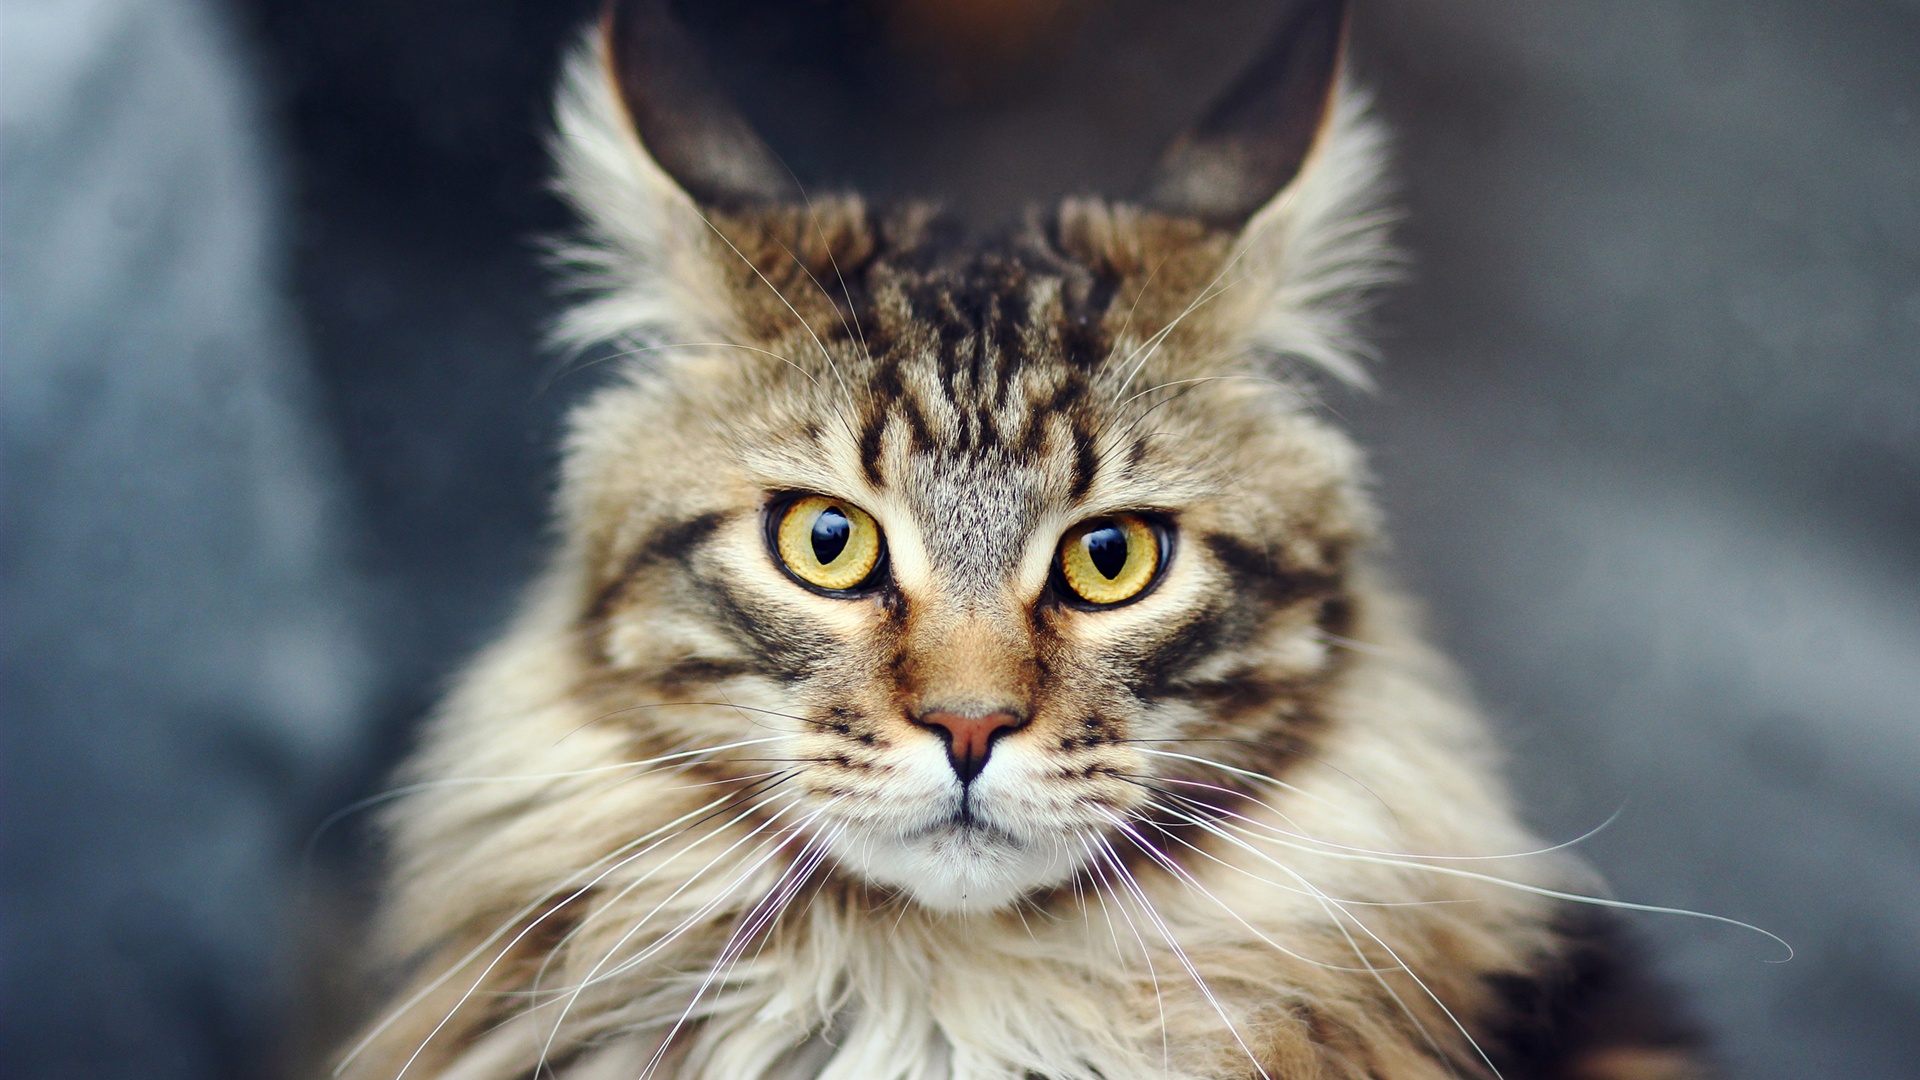 Wallpaper HD close-up of cat's face 2560x1600 HD Picture, Image